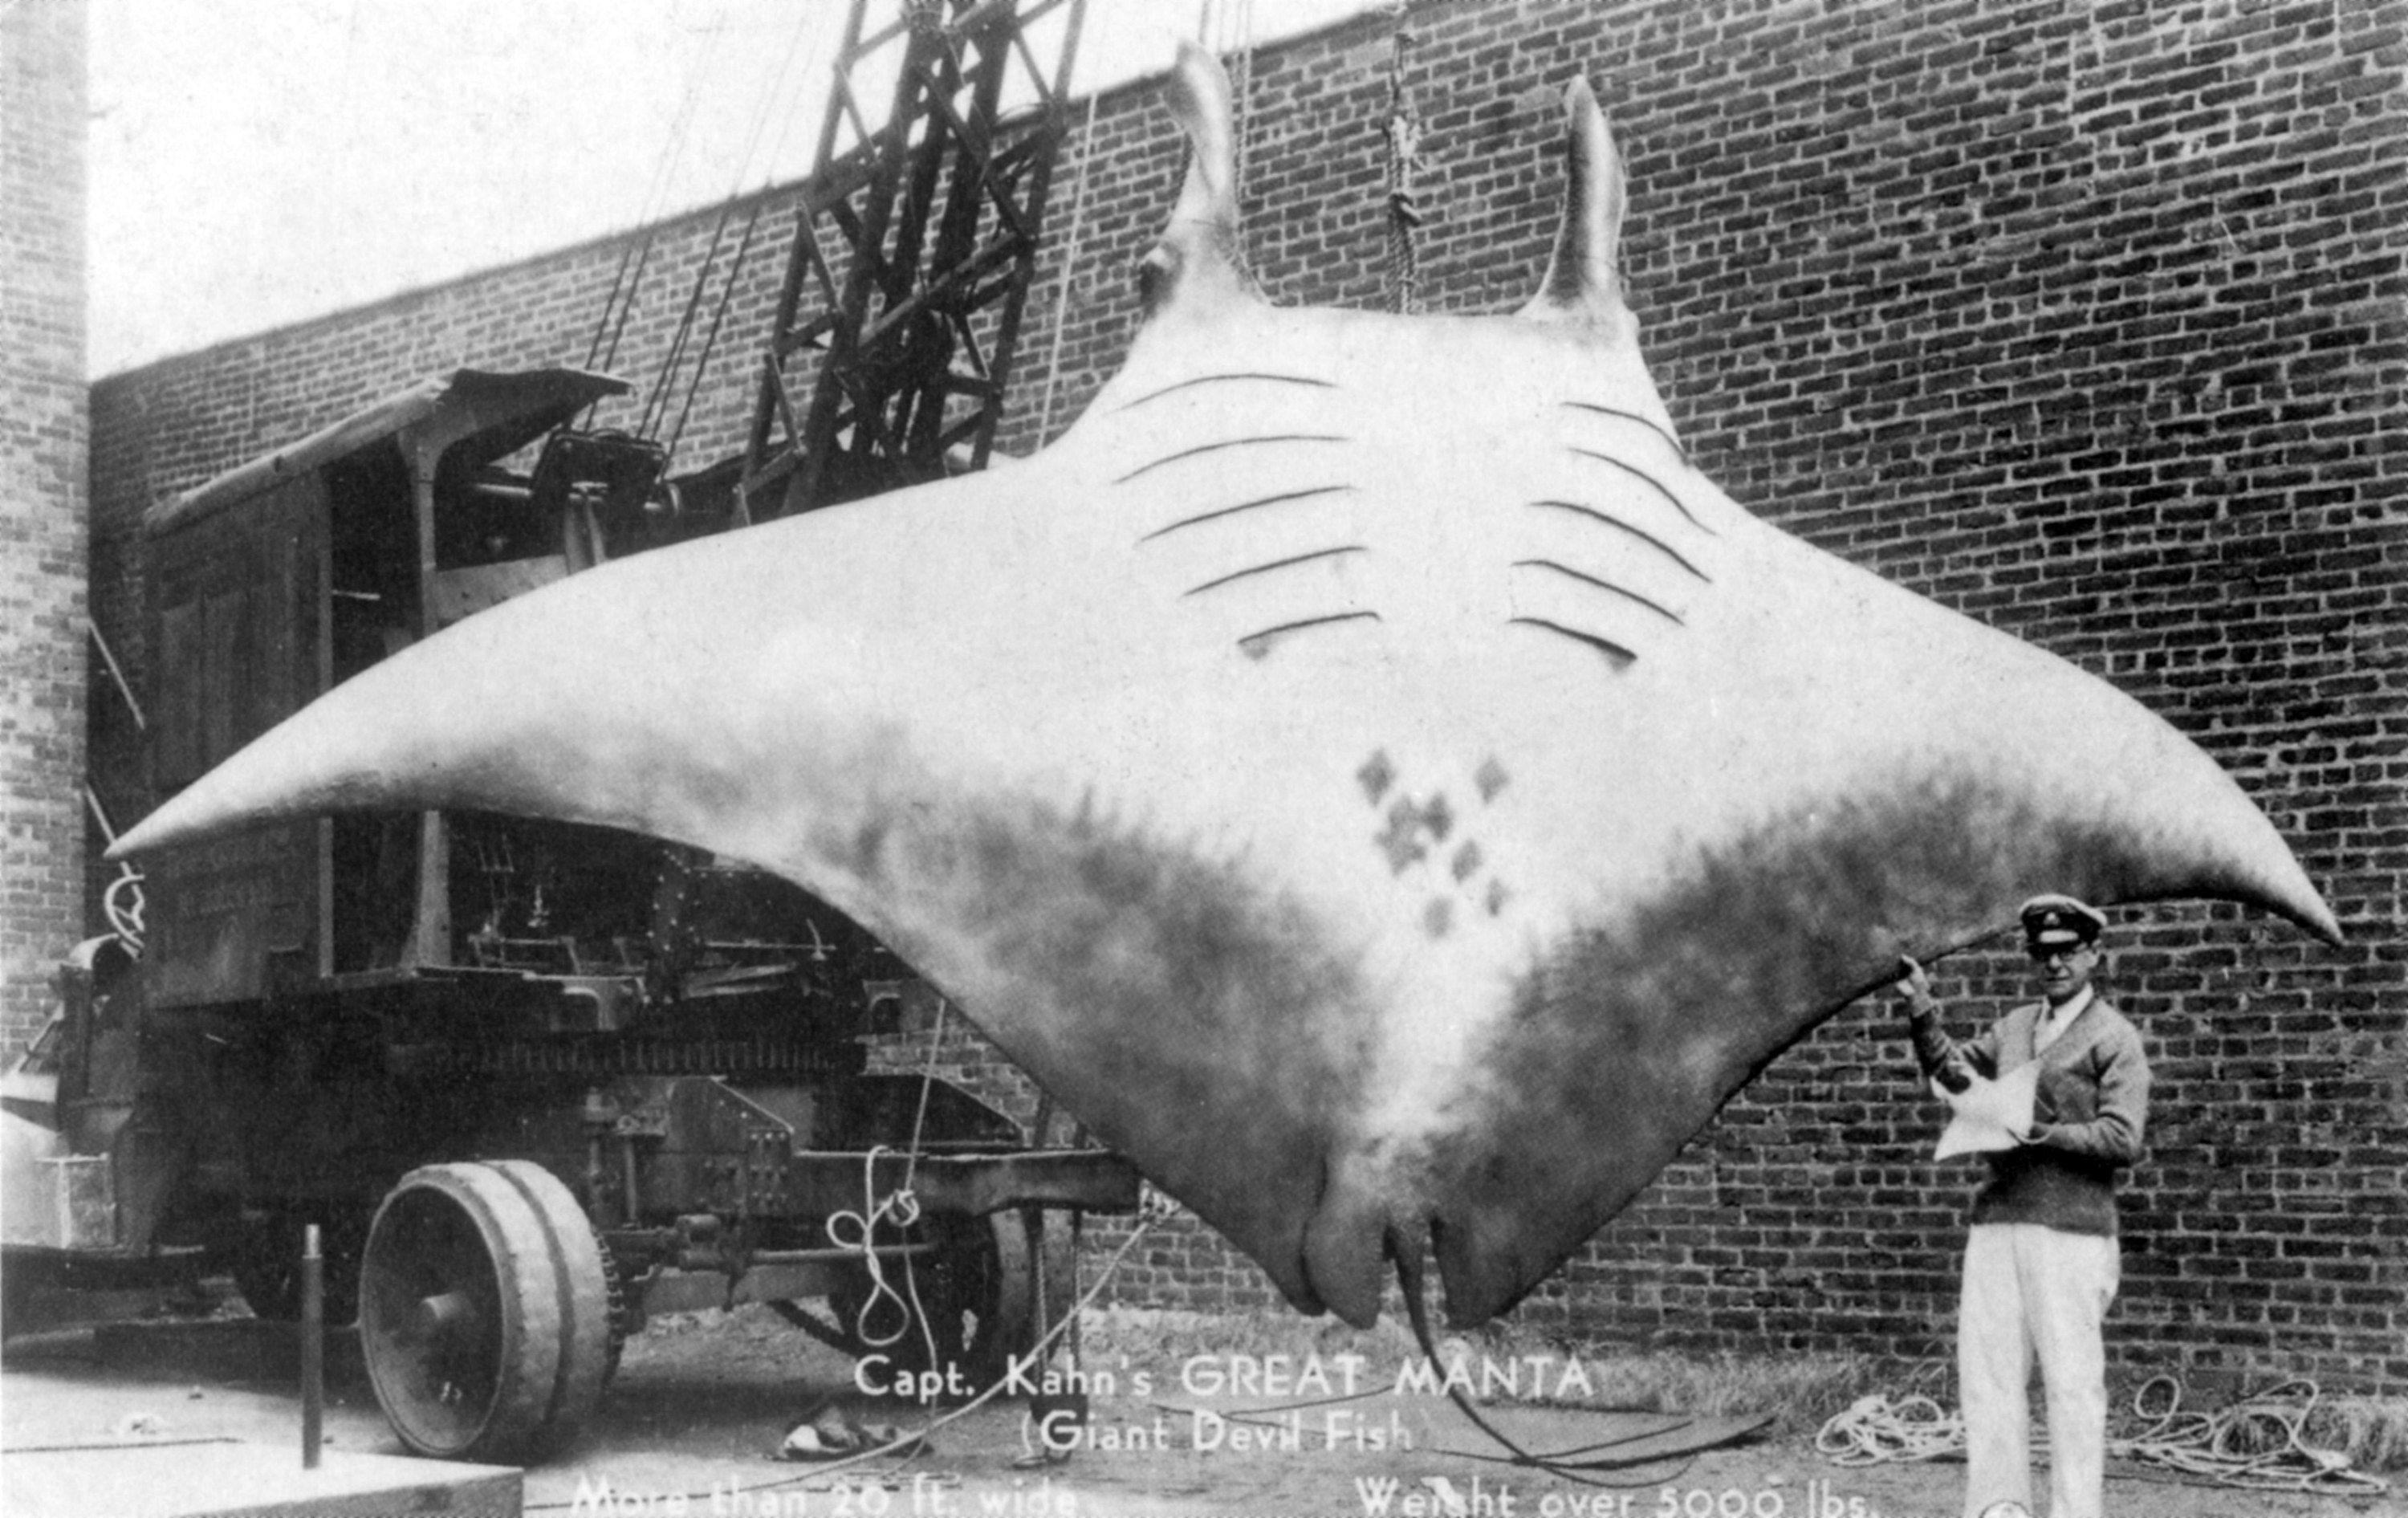 A man stands next to a huge manta ray